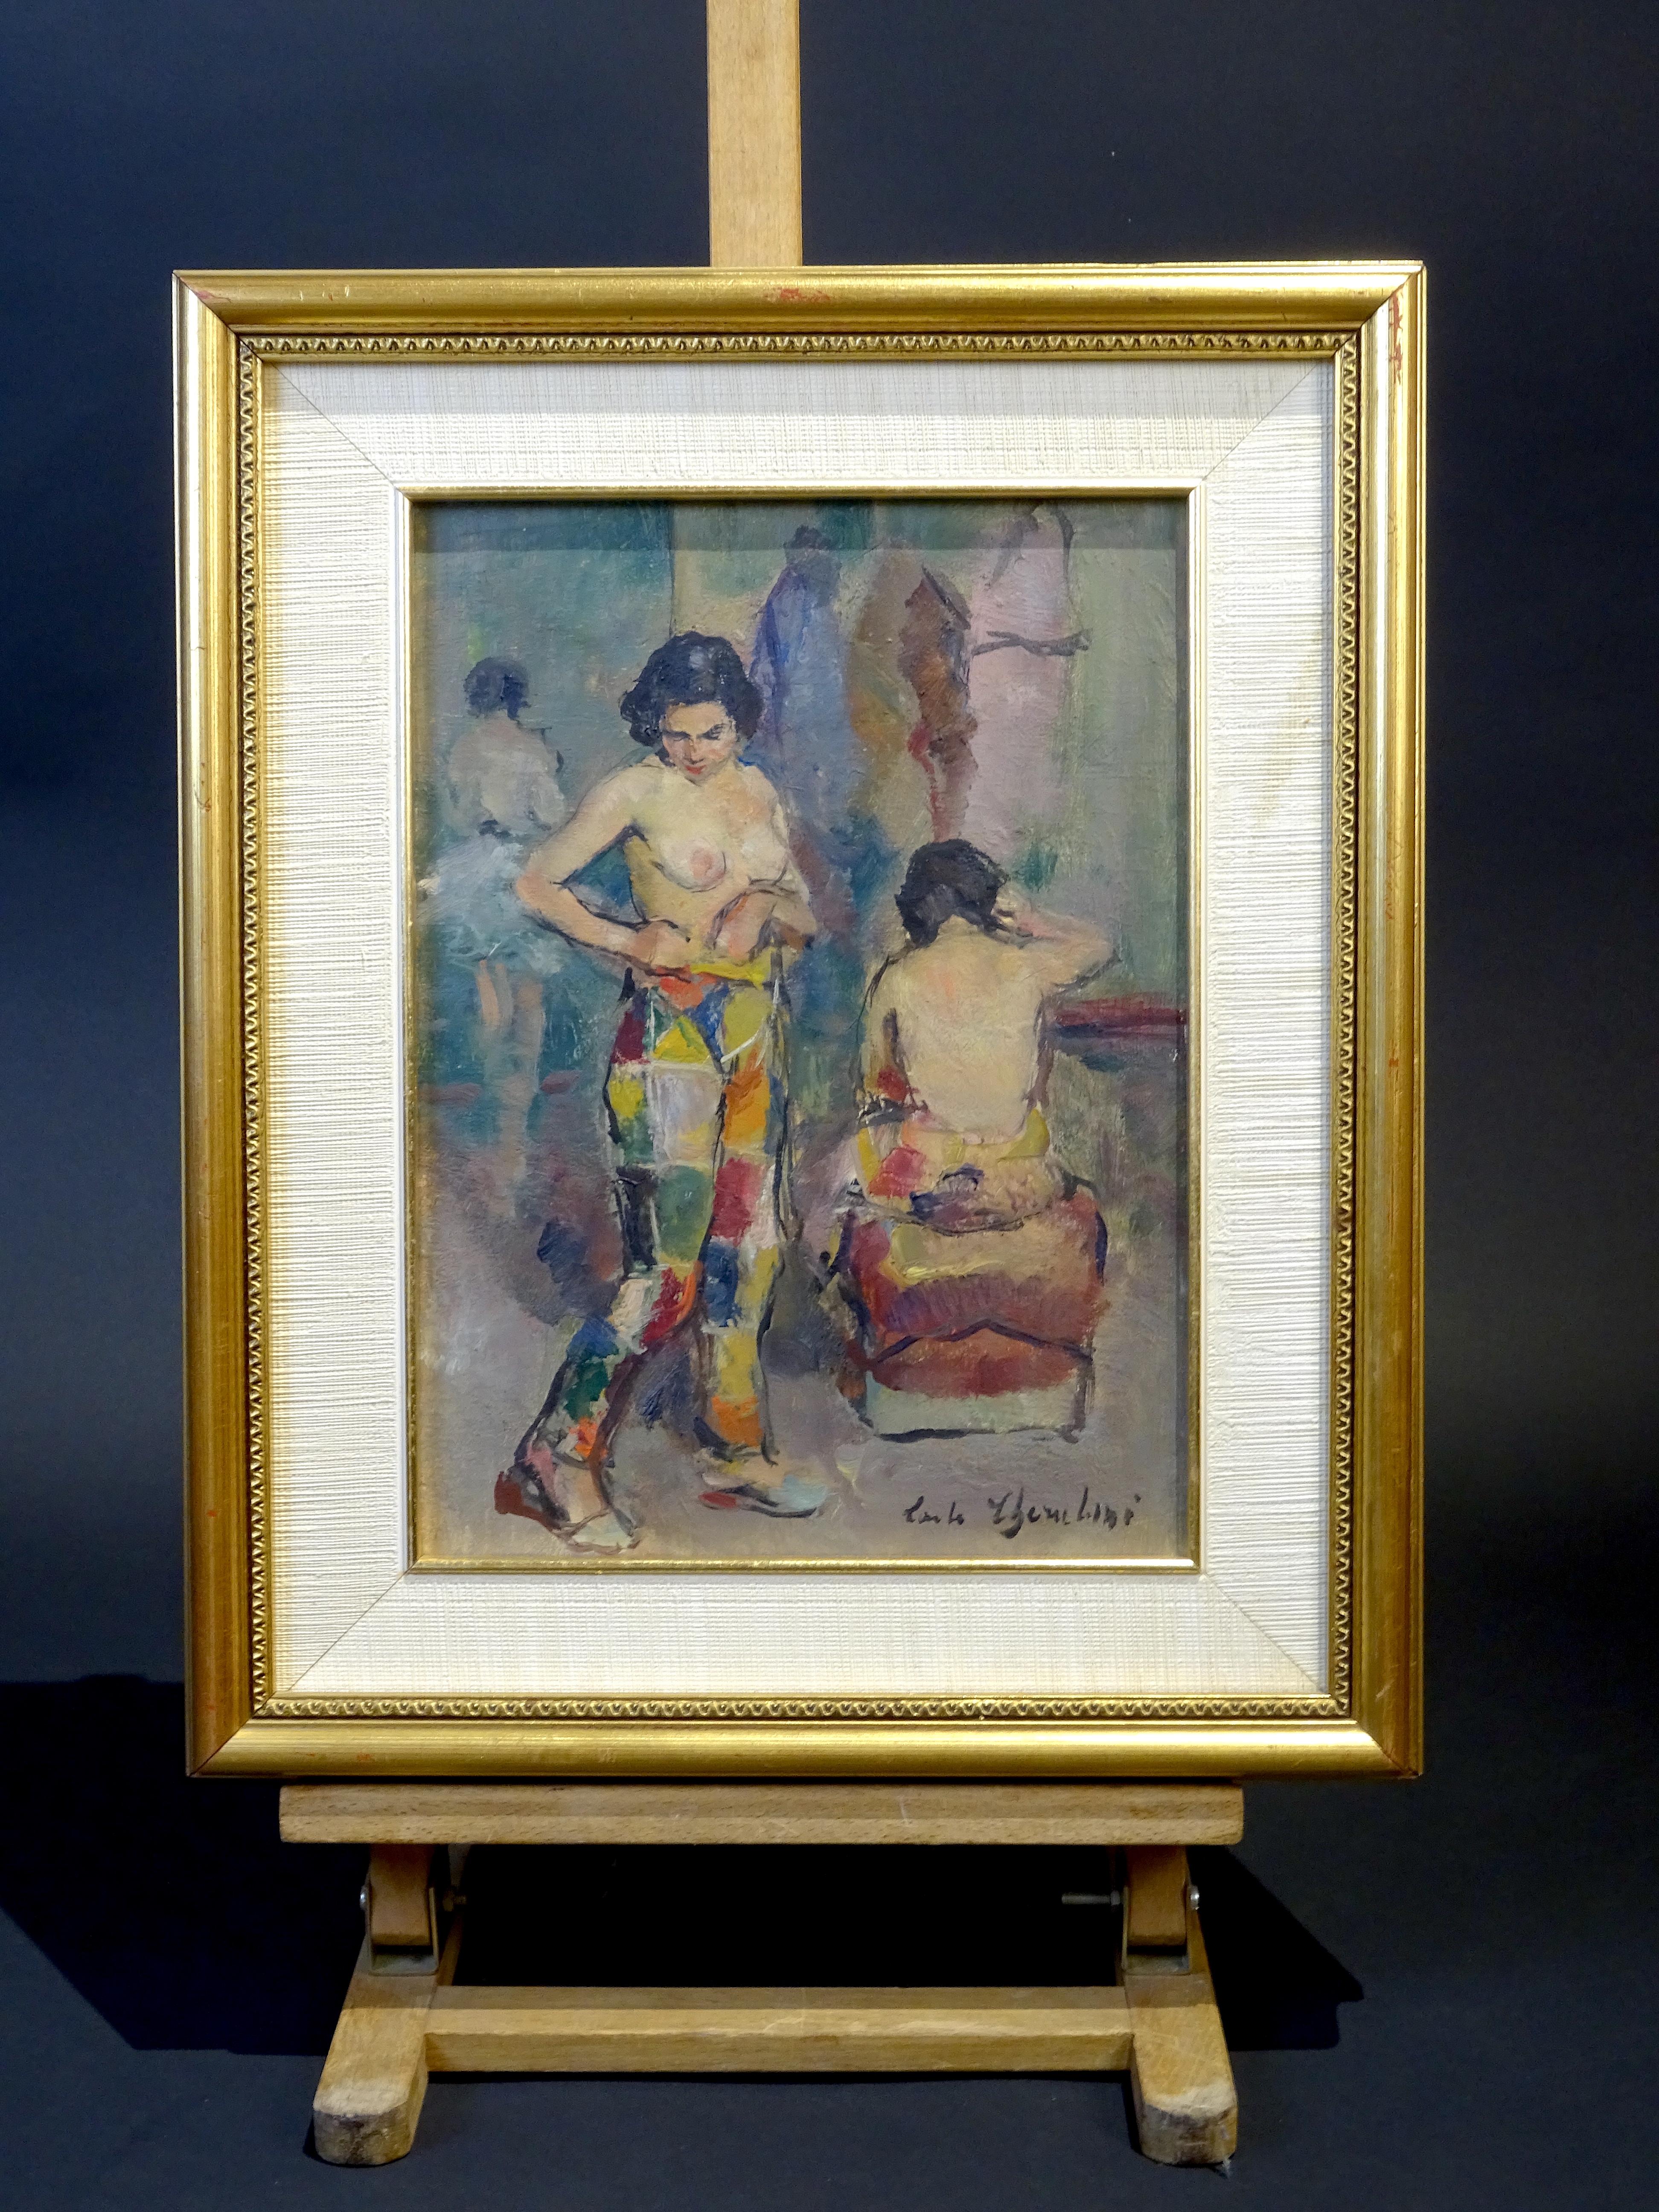 Painting done in oil on canvas by Venetian painter Carlo Cherubini (Anona 1897-1978 Venice) made around the 1950s.
The work in question features female figures wearing colorful costumes reminiscent of the mask of Harlequin, dominating the scene is